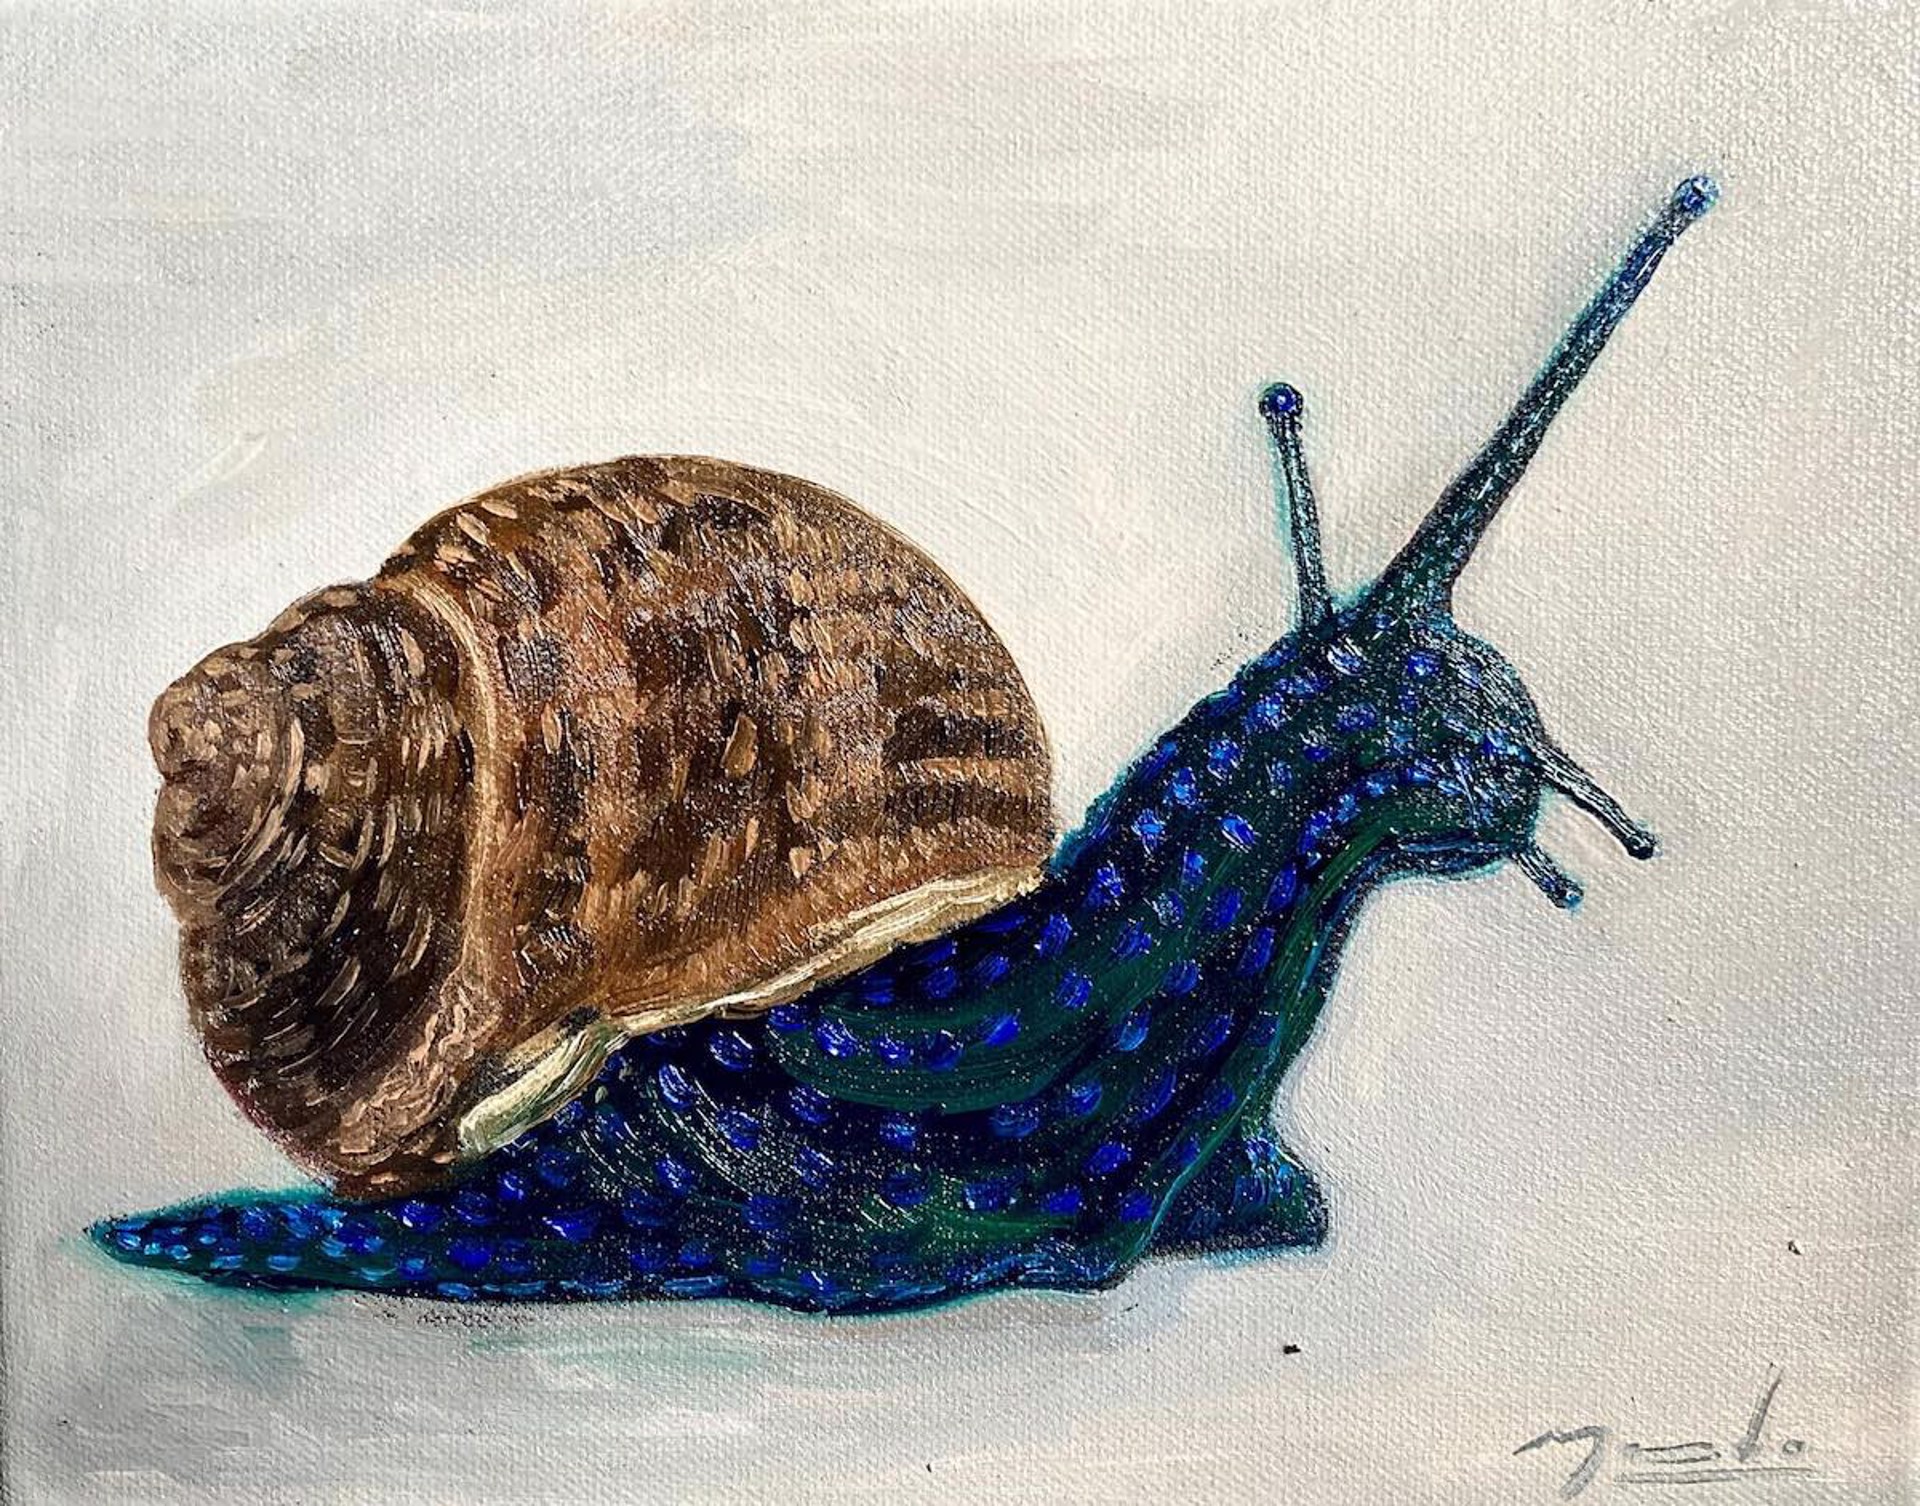 Blue Dotted Snail by Gerardo Madrigal